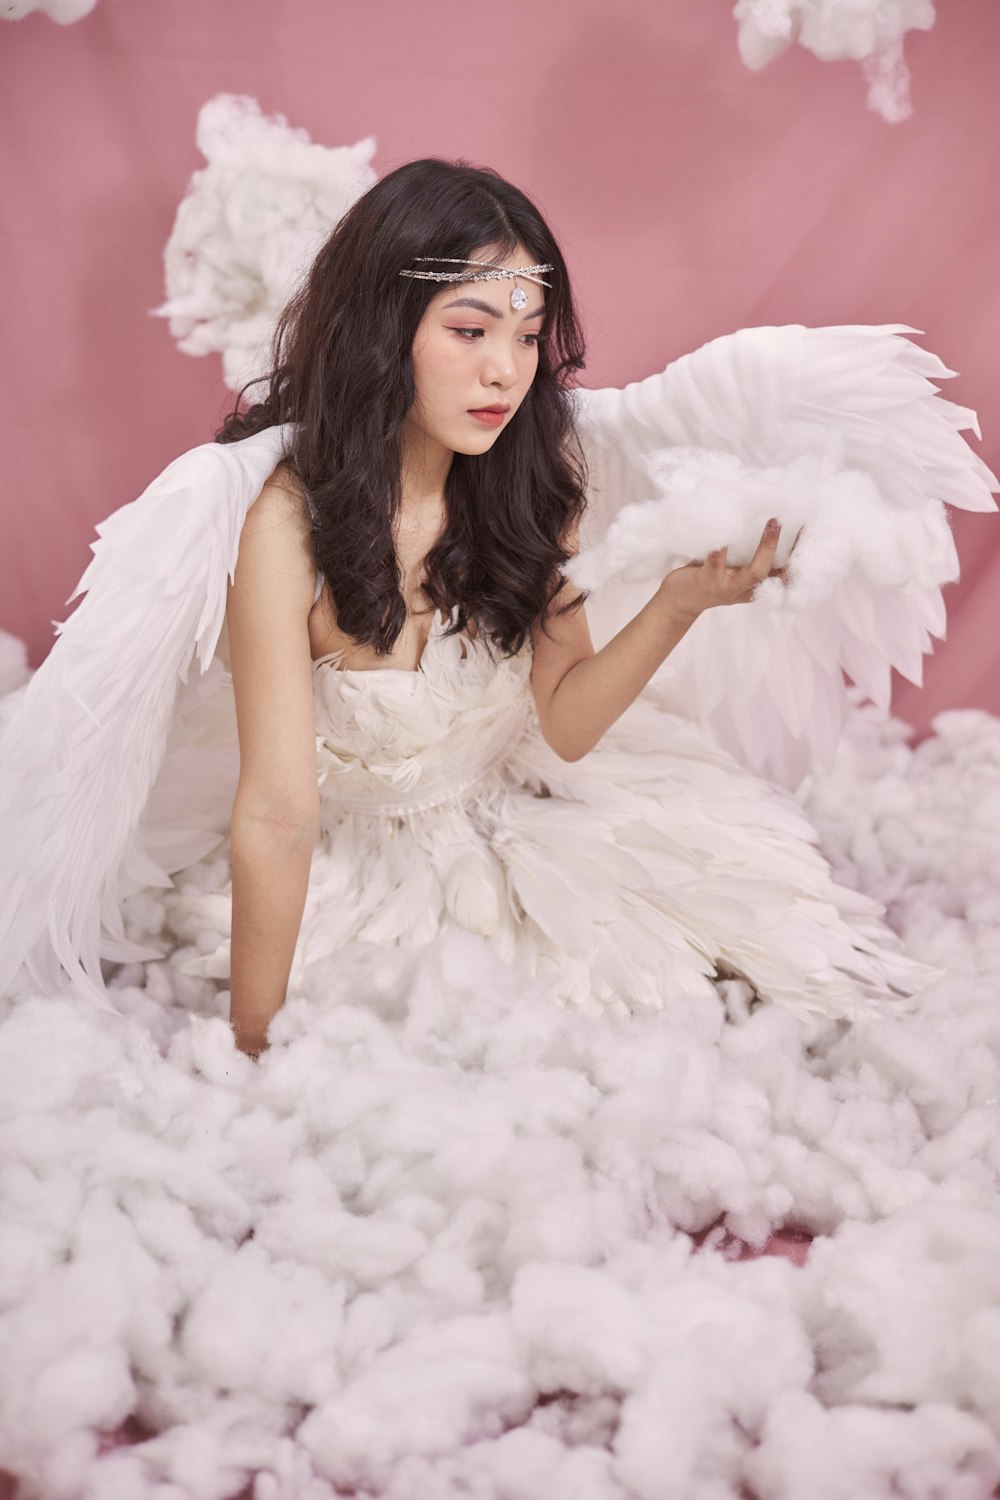 a woman in a white dress sitting on a pile of cotton